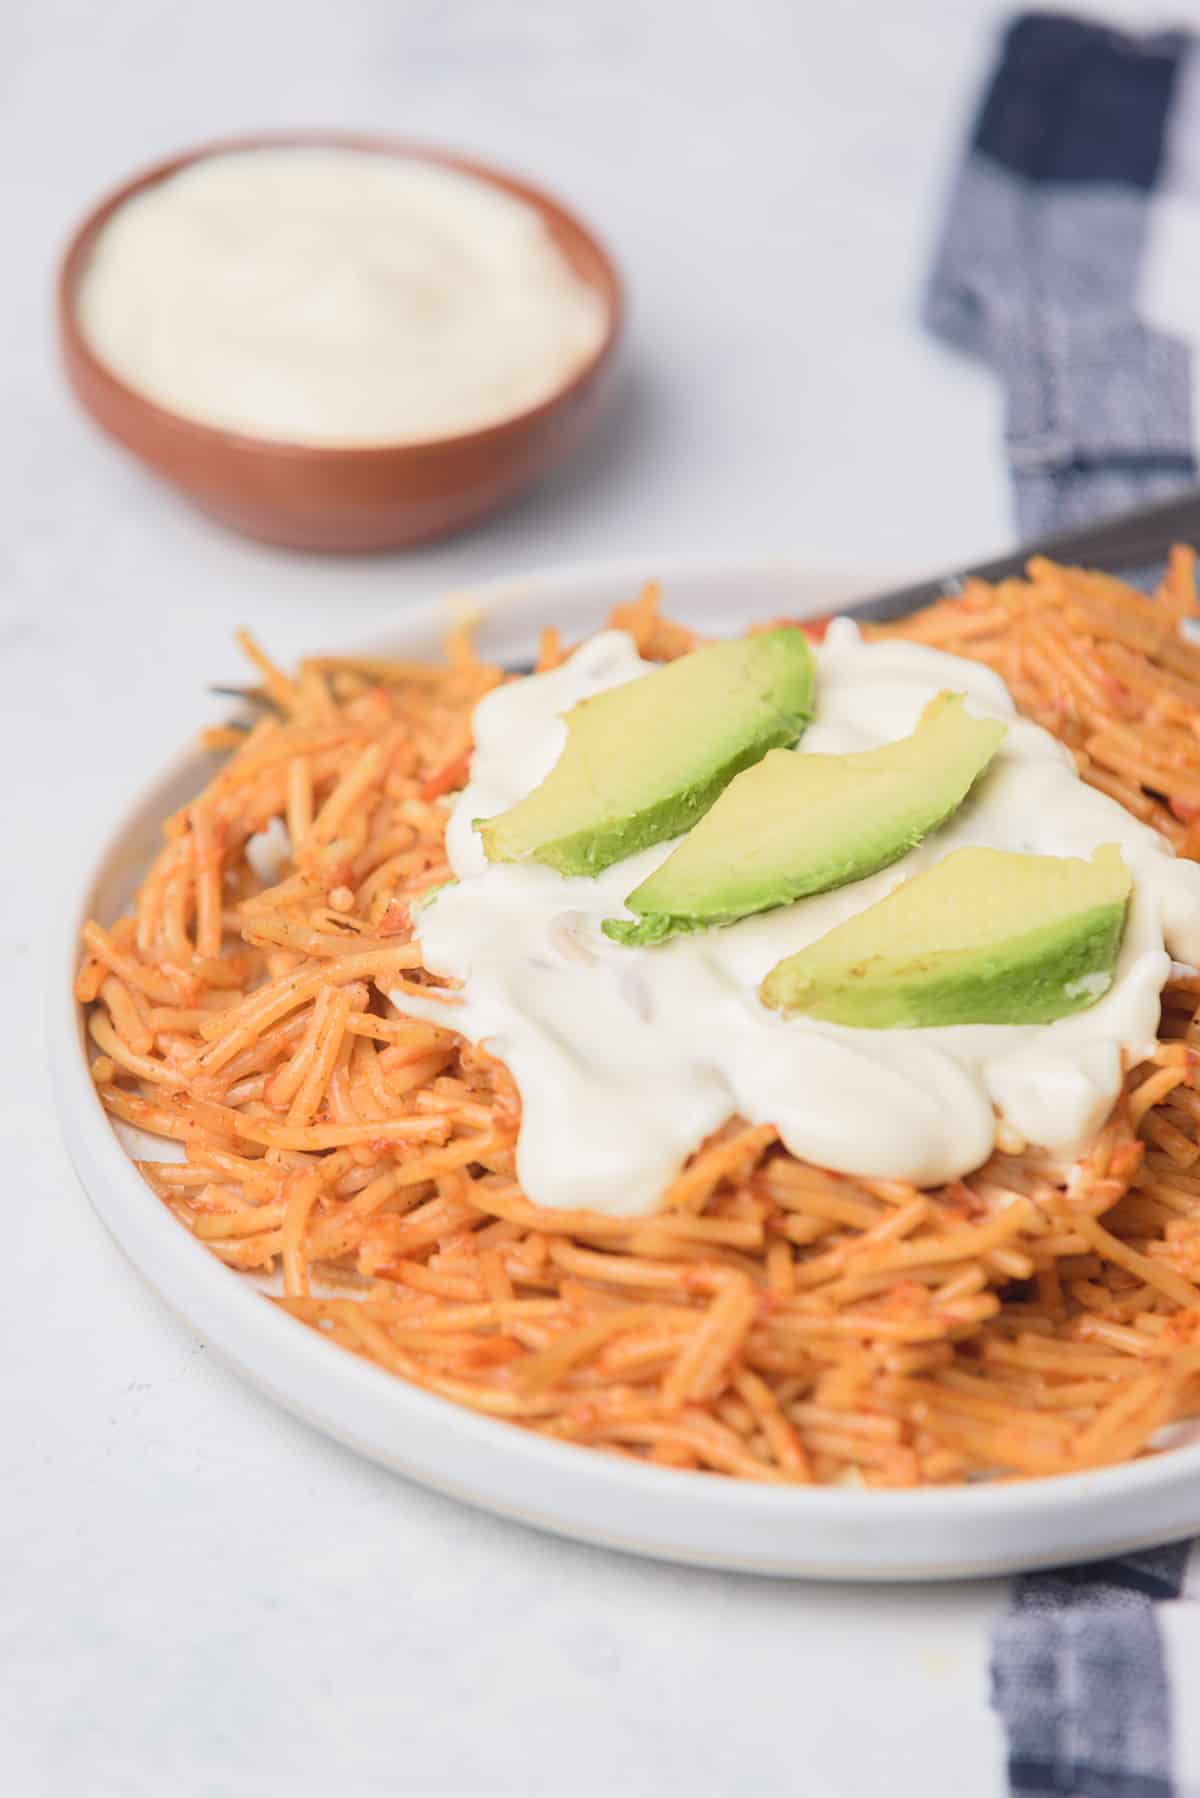 Fideo seco served on a large white plate and topped with avocado slices and sour cream.